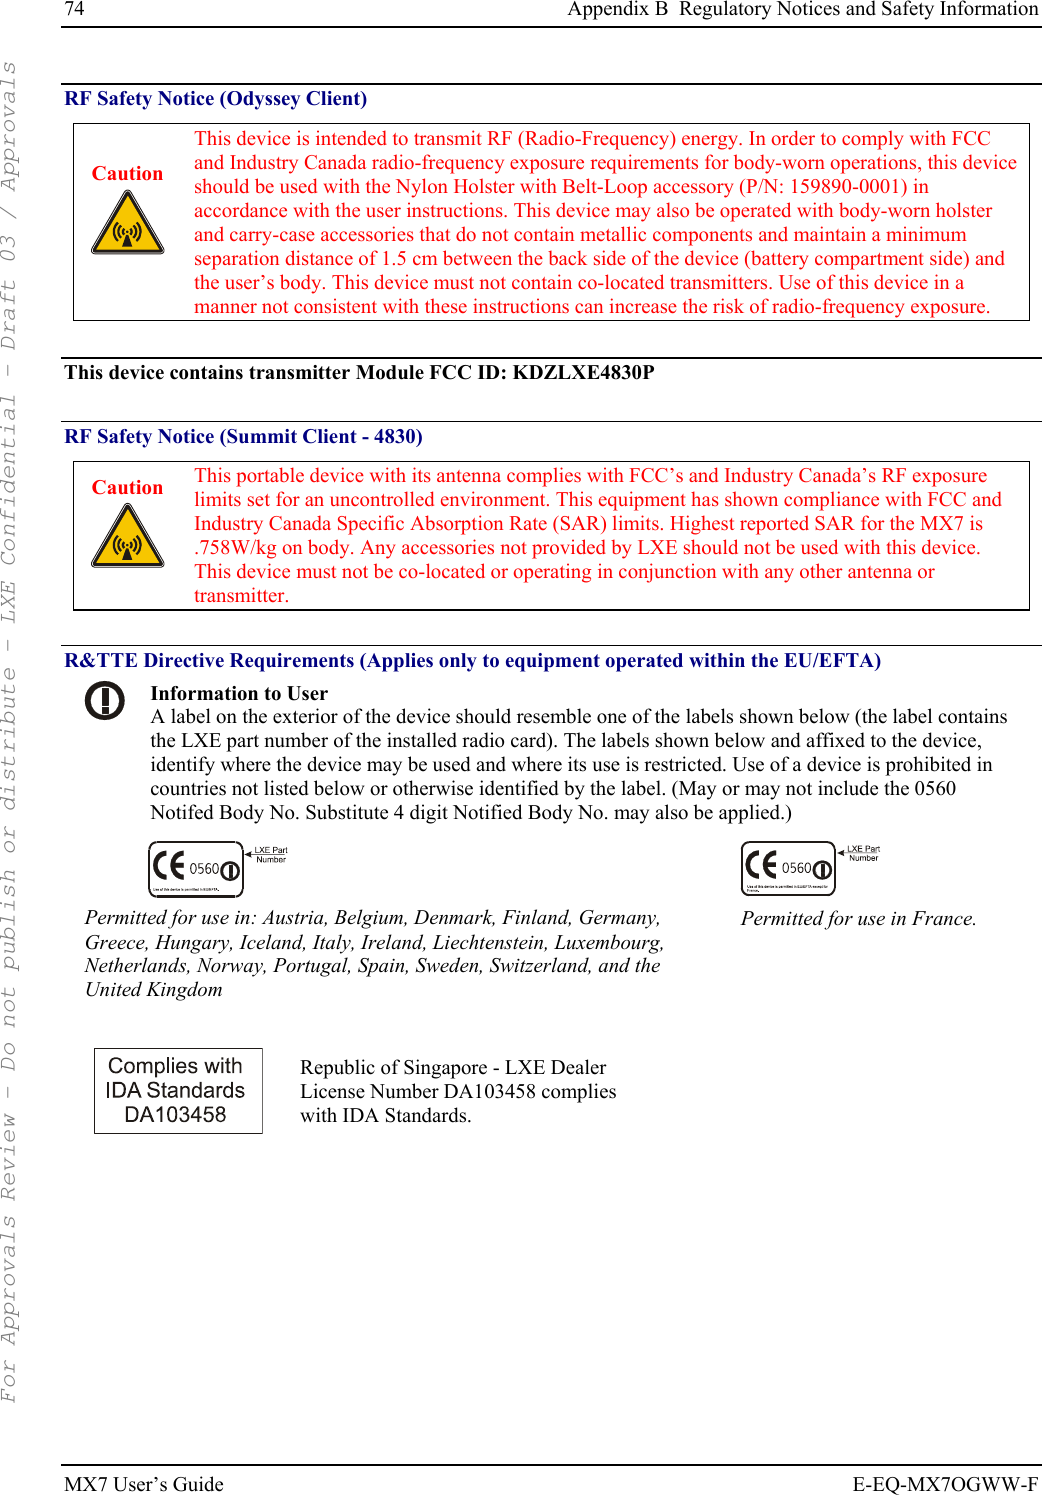 74  Appendix B  Regulatory Notices and Safety Information MX7 User’s Guide  E-EQ-MX7OGWW-F RF Safety Notice (Odyssey Client) Caution   This device is intended to transmit RF (Radio-Frequency) energy. In order to comply with FCC and Industry Canada radio-frequency exposure requirements for body-worn operations, this device should be used with the Nylon Holster with Belt-Loop accessory (P/N: 159890-0001) in accordance with the user instructions. This device may also be operated with body-worn holster and carry-case accessories that do not contain metallic components and maintain a minimum separation distance of 1.5 cm between the back side of the device (battery compartment side) and the user’s body. This device must not contain co-located transmitters. Use of this device in a manner not consistent with these instructions can increase the risk of radio-frequency exposure.  This device contains transmitter Module FCC ID: KDZLXE4830P  RF Safety Notice (Summit Client - 4830) Caution   This portable device with its antenna complies with FCC’s and Industry Canada’s RF exposure limits set for an uncontrolled environment. This equipment has shown compliance with FCC and Industry Canada Specific Absorption Rate (SAR) limits. Highest reported SAR for the MX7 is .758W/kg on body. Any accessories not provided by LXE should not be used with this device. This device must not be co-located or operating in conjunction with any other antenna or transmitter.  R&amp;TTE Directive Requirements (Applies only to equipment operated within the EU/EFTA)  Information to User A label on the exterior of the device should resemble one of the labels shown below (the label contains the LXE part number of the installed radio card). The labels shown below and affixed to the device, identify where the device may be used and where its use is restricted. Use of a device is prohibited in countries not listed below or otherwise identified by the label. (May or may not include the 0560 Notifed Body No. Substitute 4 digit Notified Body No. may also be applied.)   Permitted for use in: Austria, Belgium, Denmark, Finland, Germany, Greece, Hungary, Iceland, Italy, Ireland, Liechtenstein, Luxembourg, Netherlands, Norway, Portugal, Spain, Sweden, Switzerland, and the United Kingdom Permitted for use in France.   Republic of Singapore - LXE Dealer License Number DA103458 complies with IDA Standards.  For Approvals Review - Do not publish or distribute - LXE Confidential - Draft 03 / Approvals